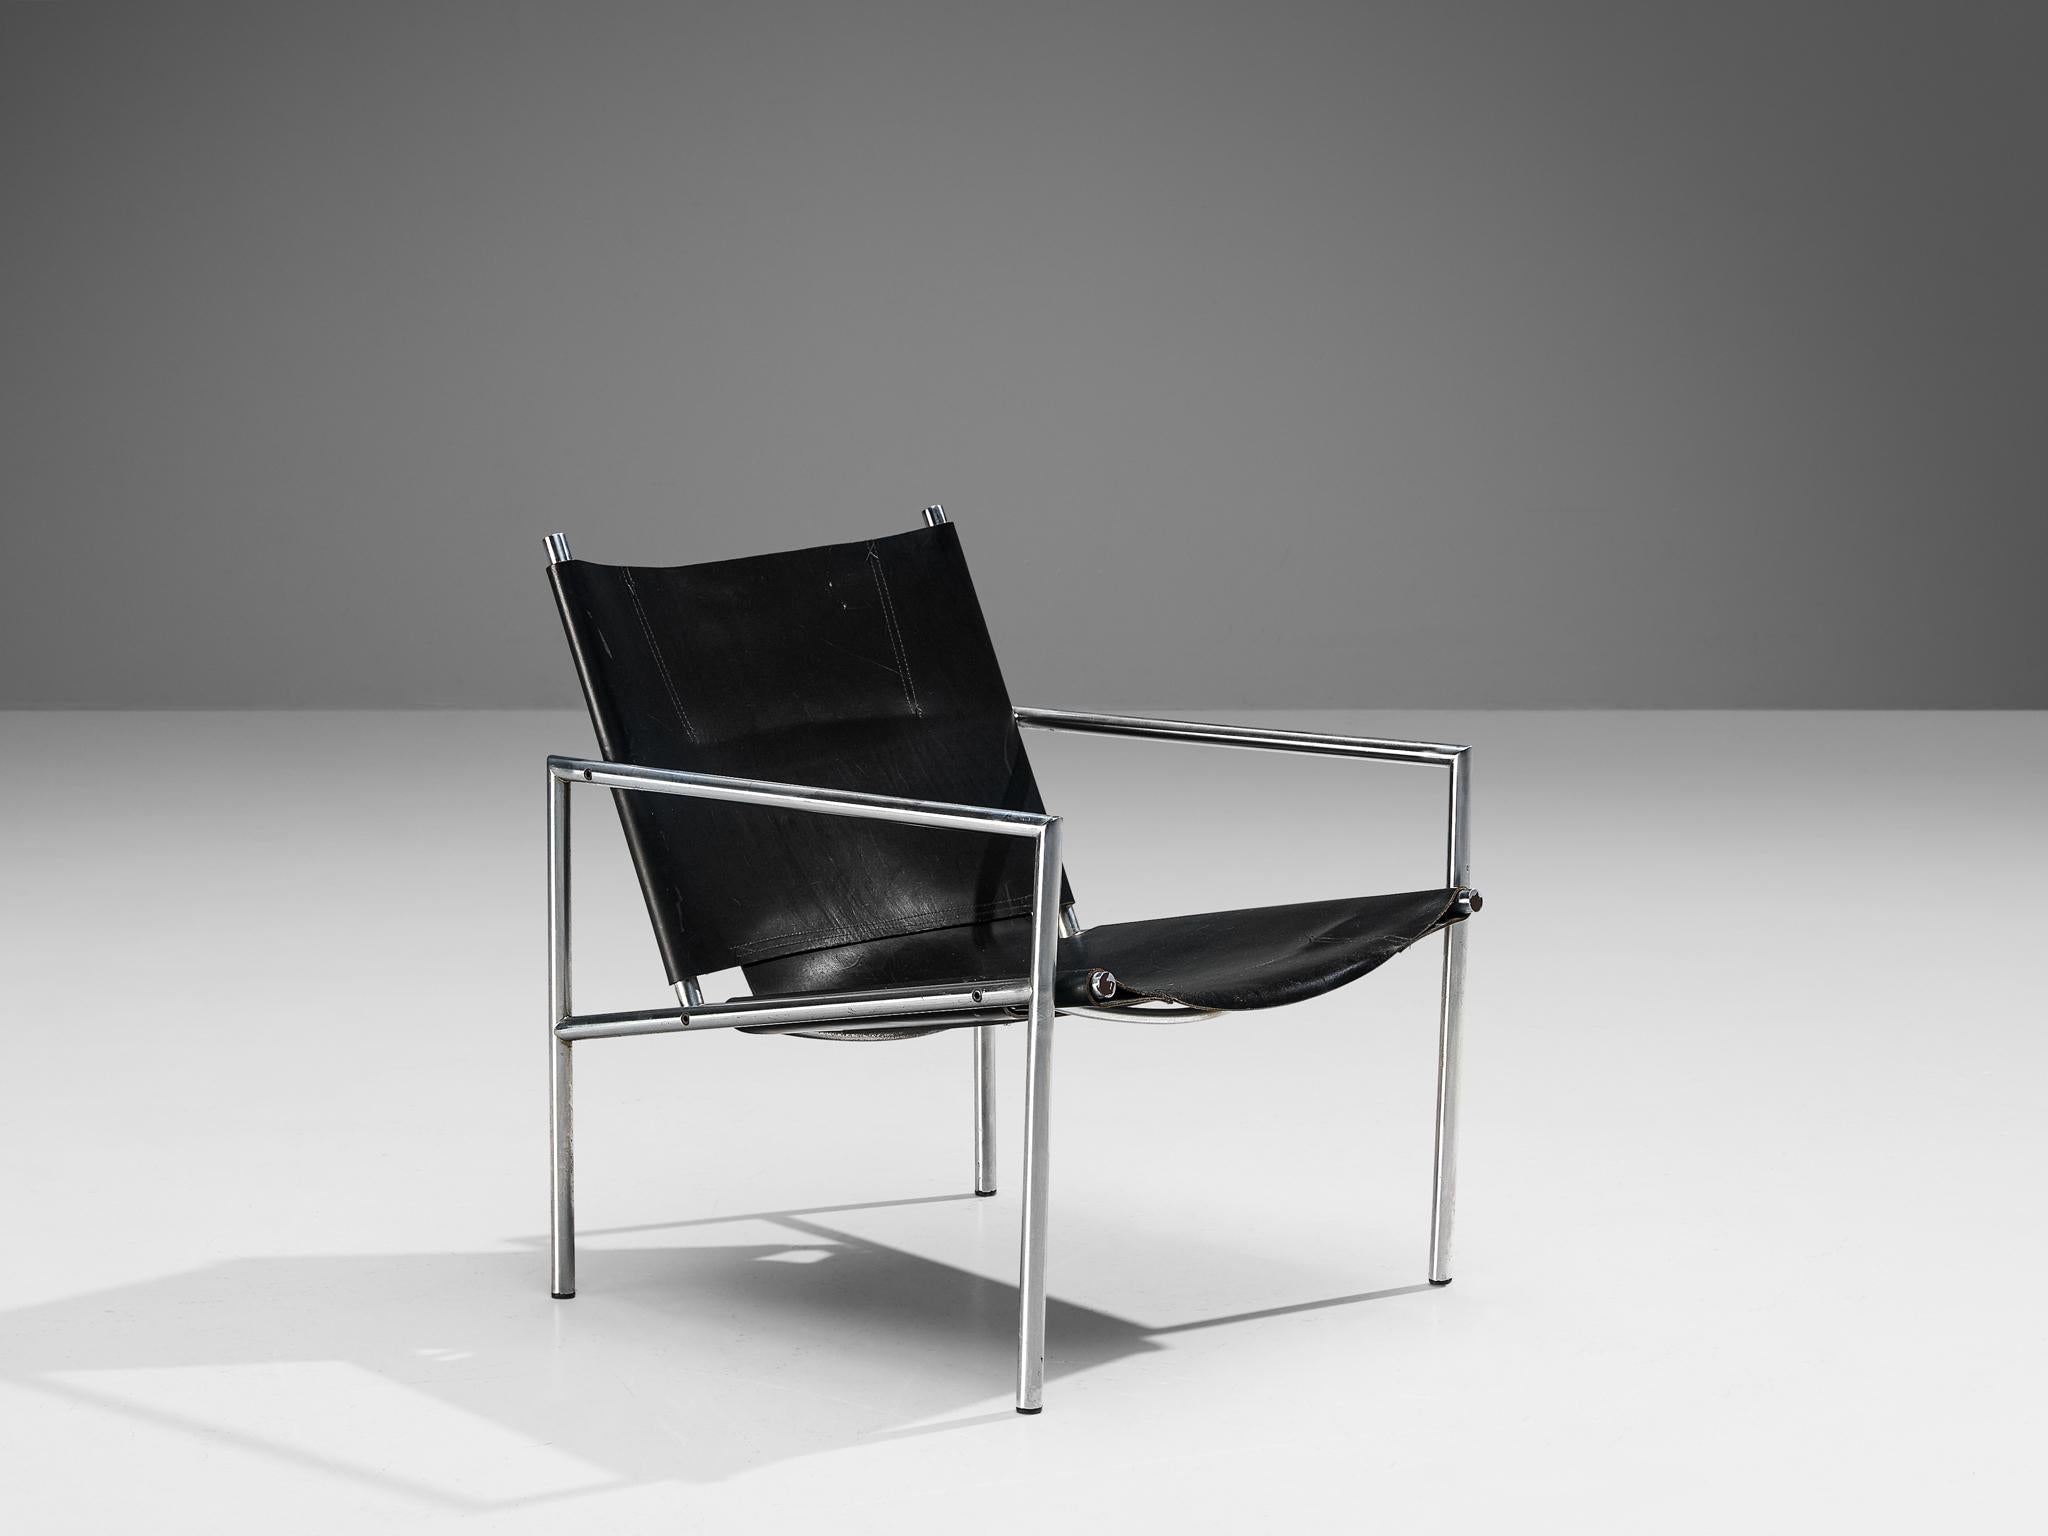 Martin Visser for 't Spectrum, lounge chair, model 'SZ 02', leather, brushed steel, The Netherlands, 1965

This modern, Minimalist easy chair is made in tubular brushed steel in combination with black leather upholstery. The open construction of the